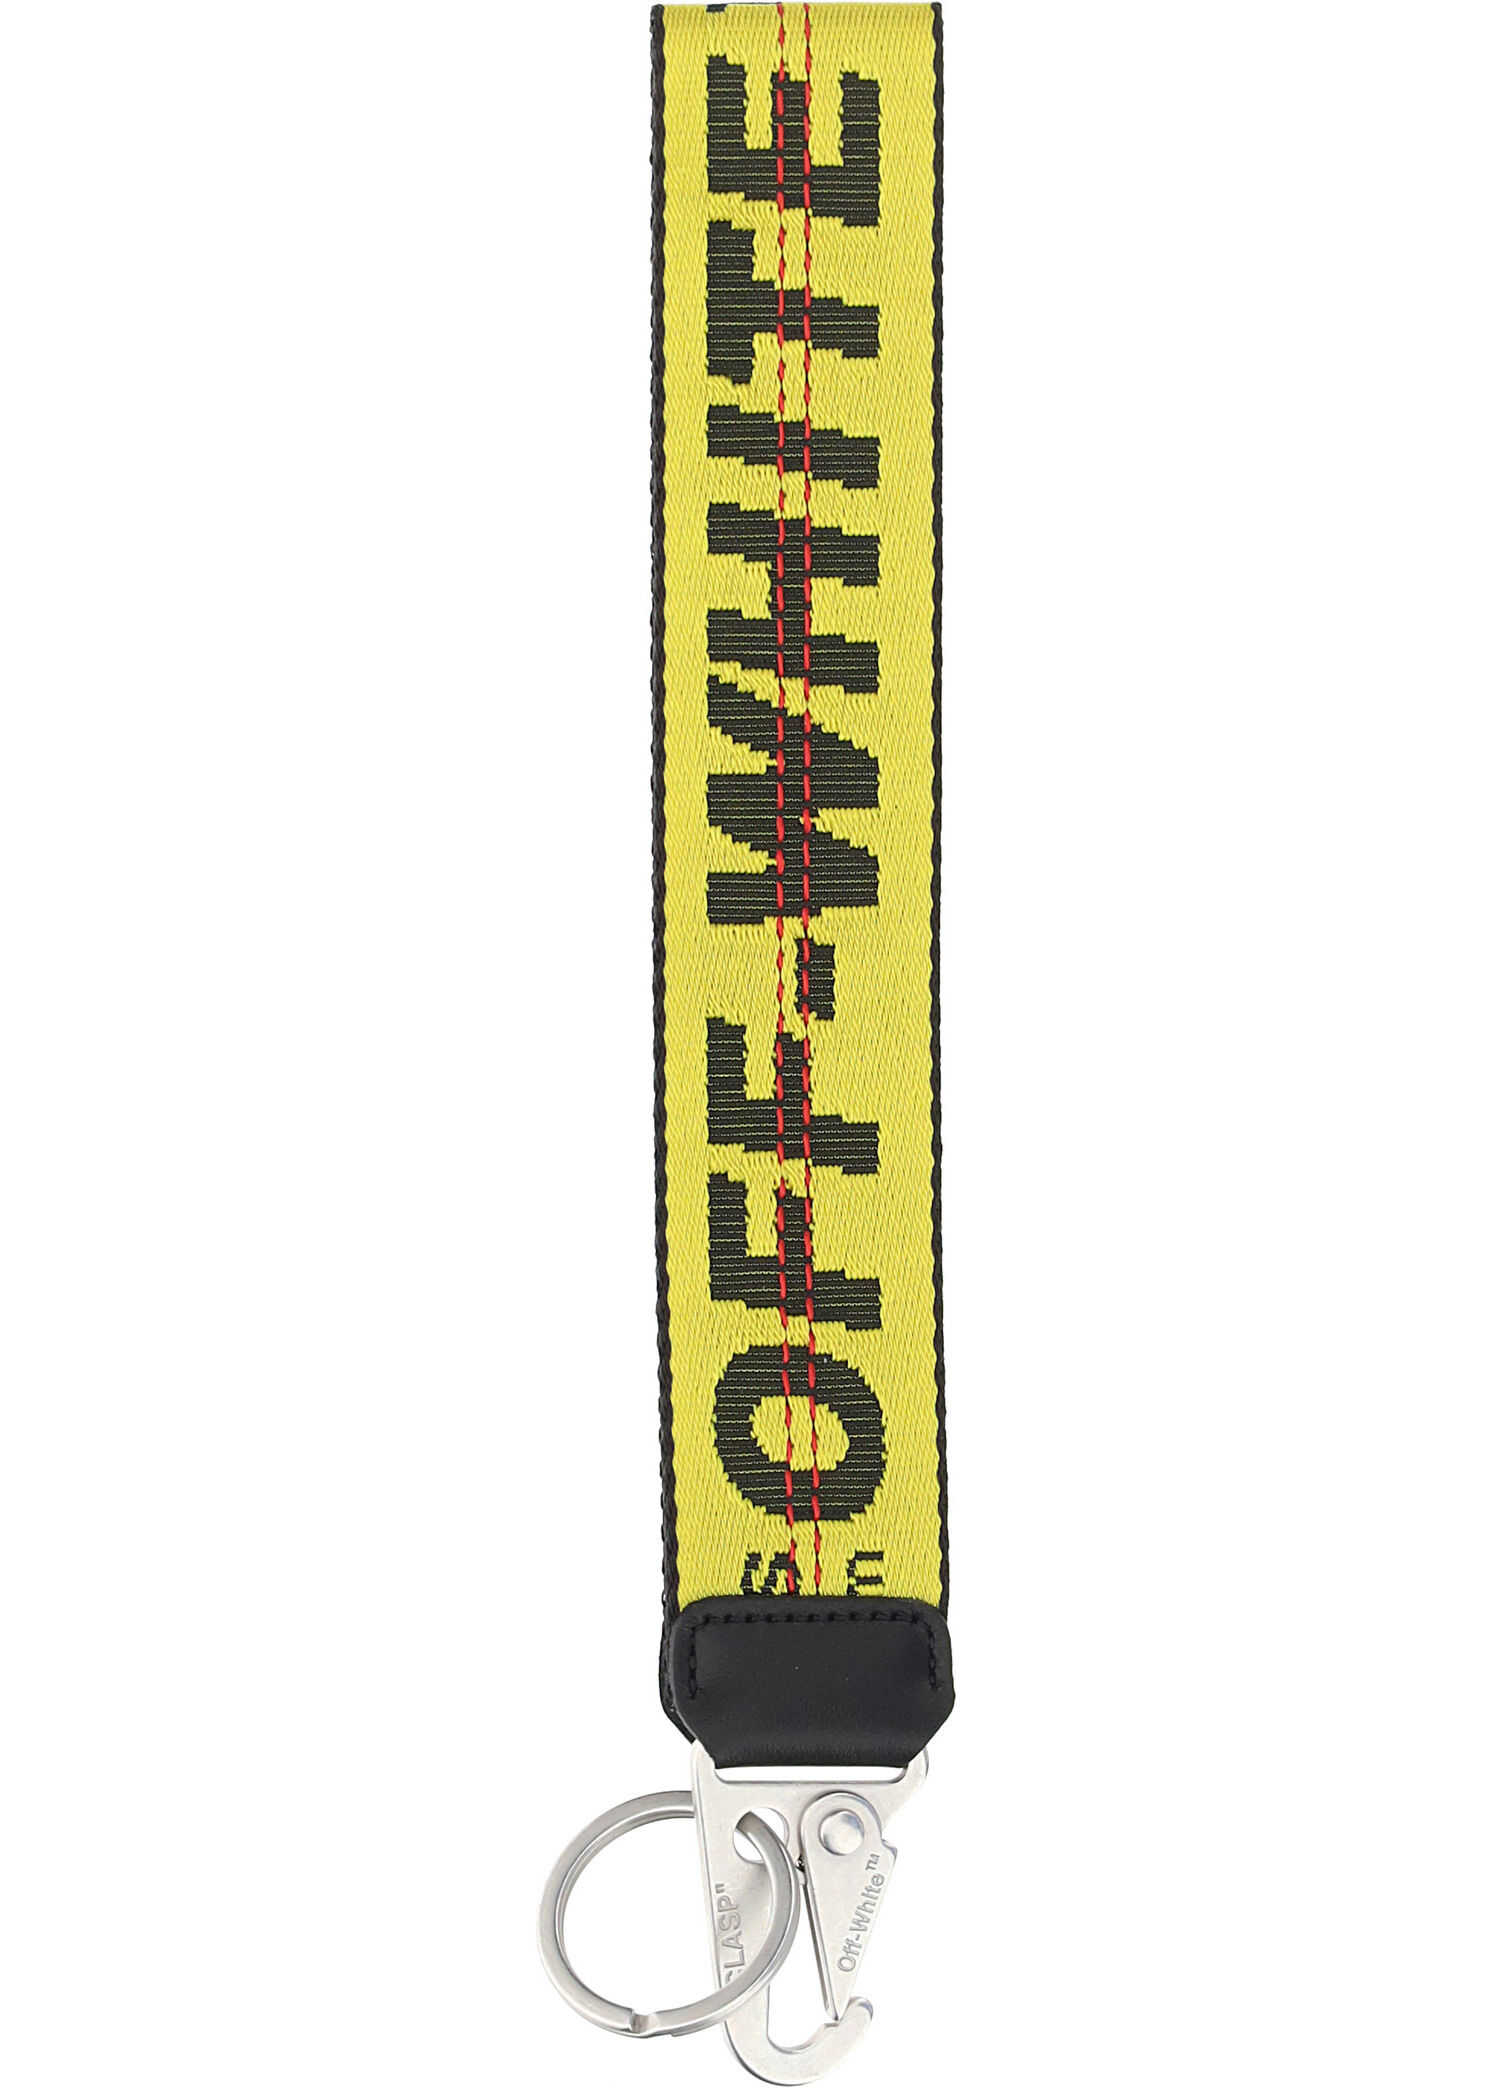 Off-White Key Holder OMZG051S21FAB001 YELLOW BLACK